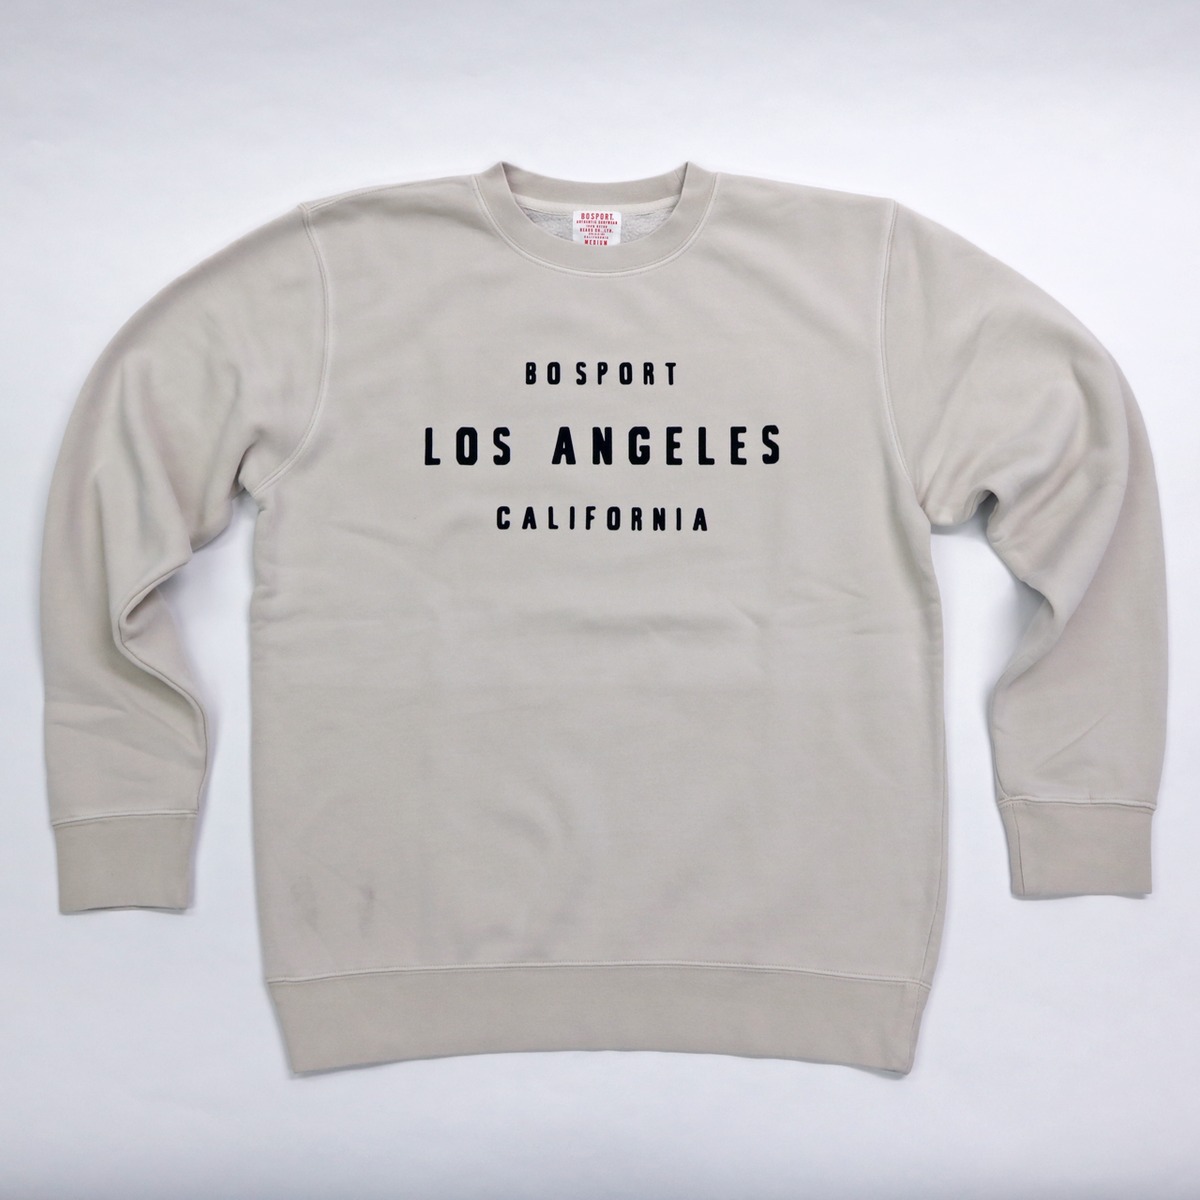 BS24SP-9026 Midweight Pigment Dyed Crew Sweatshirt “BOSPORT LOS ANGELES  CALIFORNIA” (Ivory) | GOLDEN STATE powered by BASE